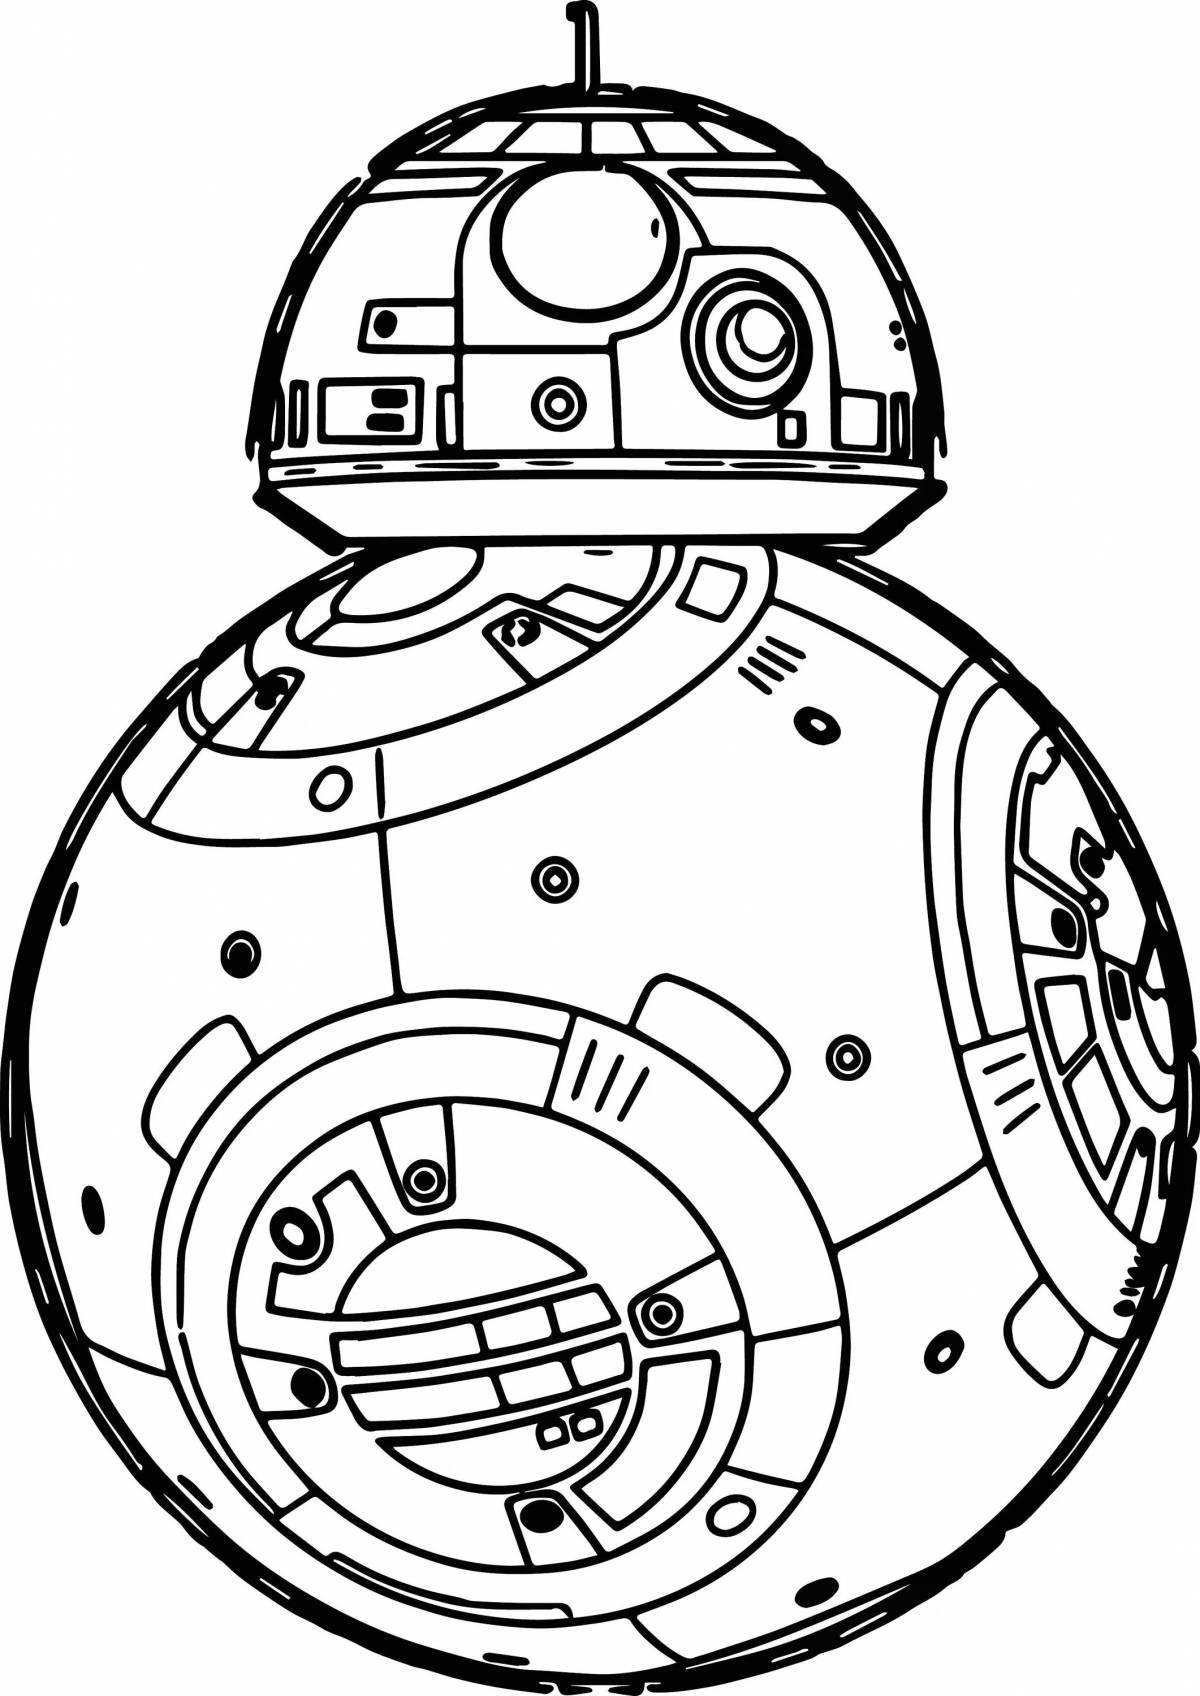 Surreal space wars coloring book